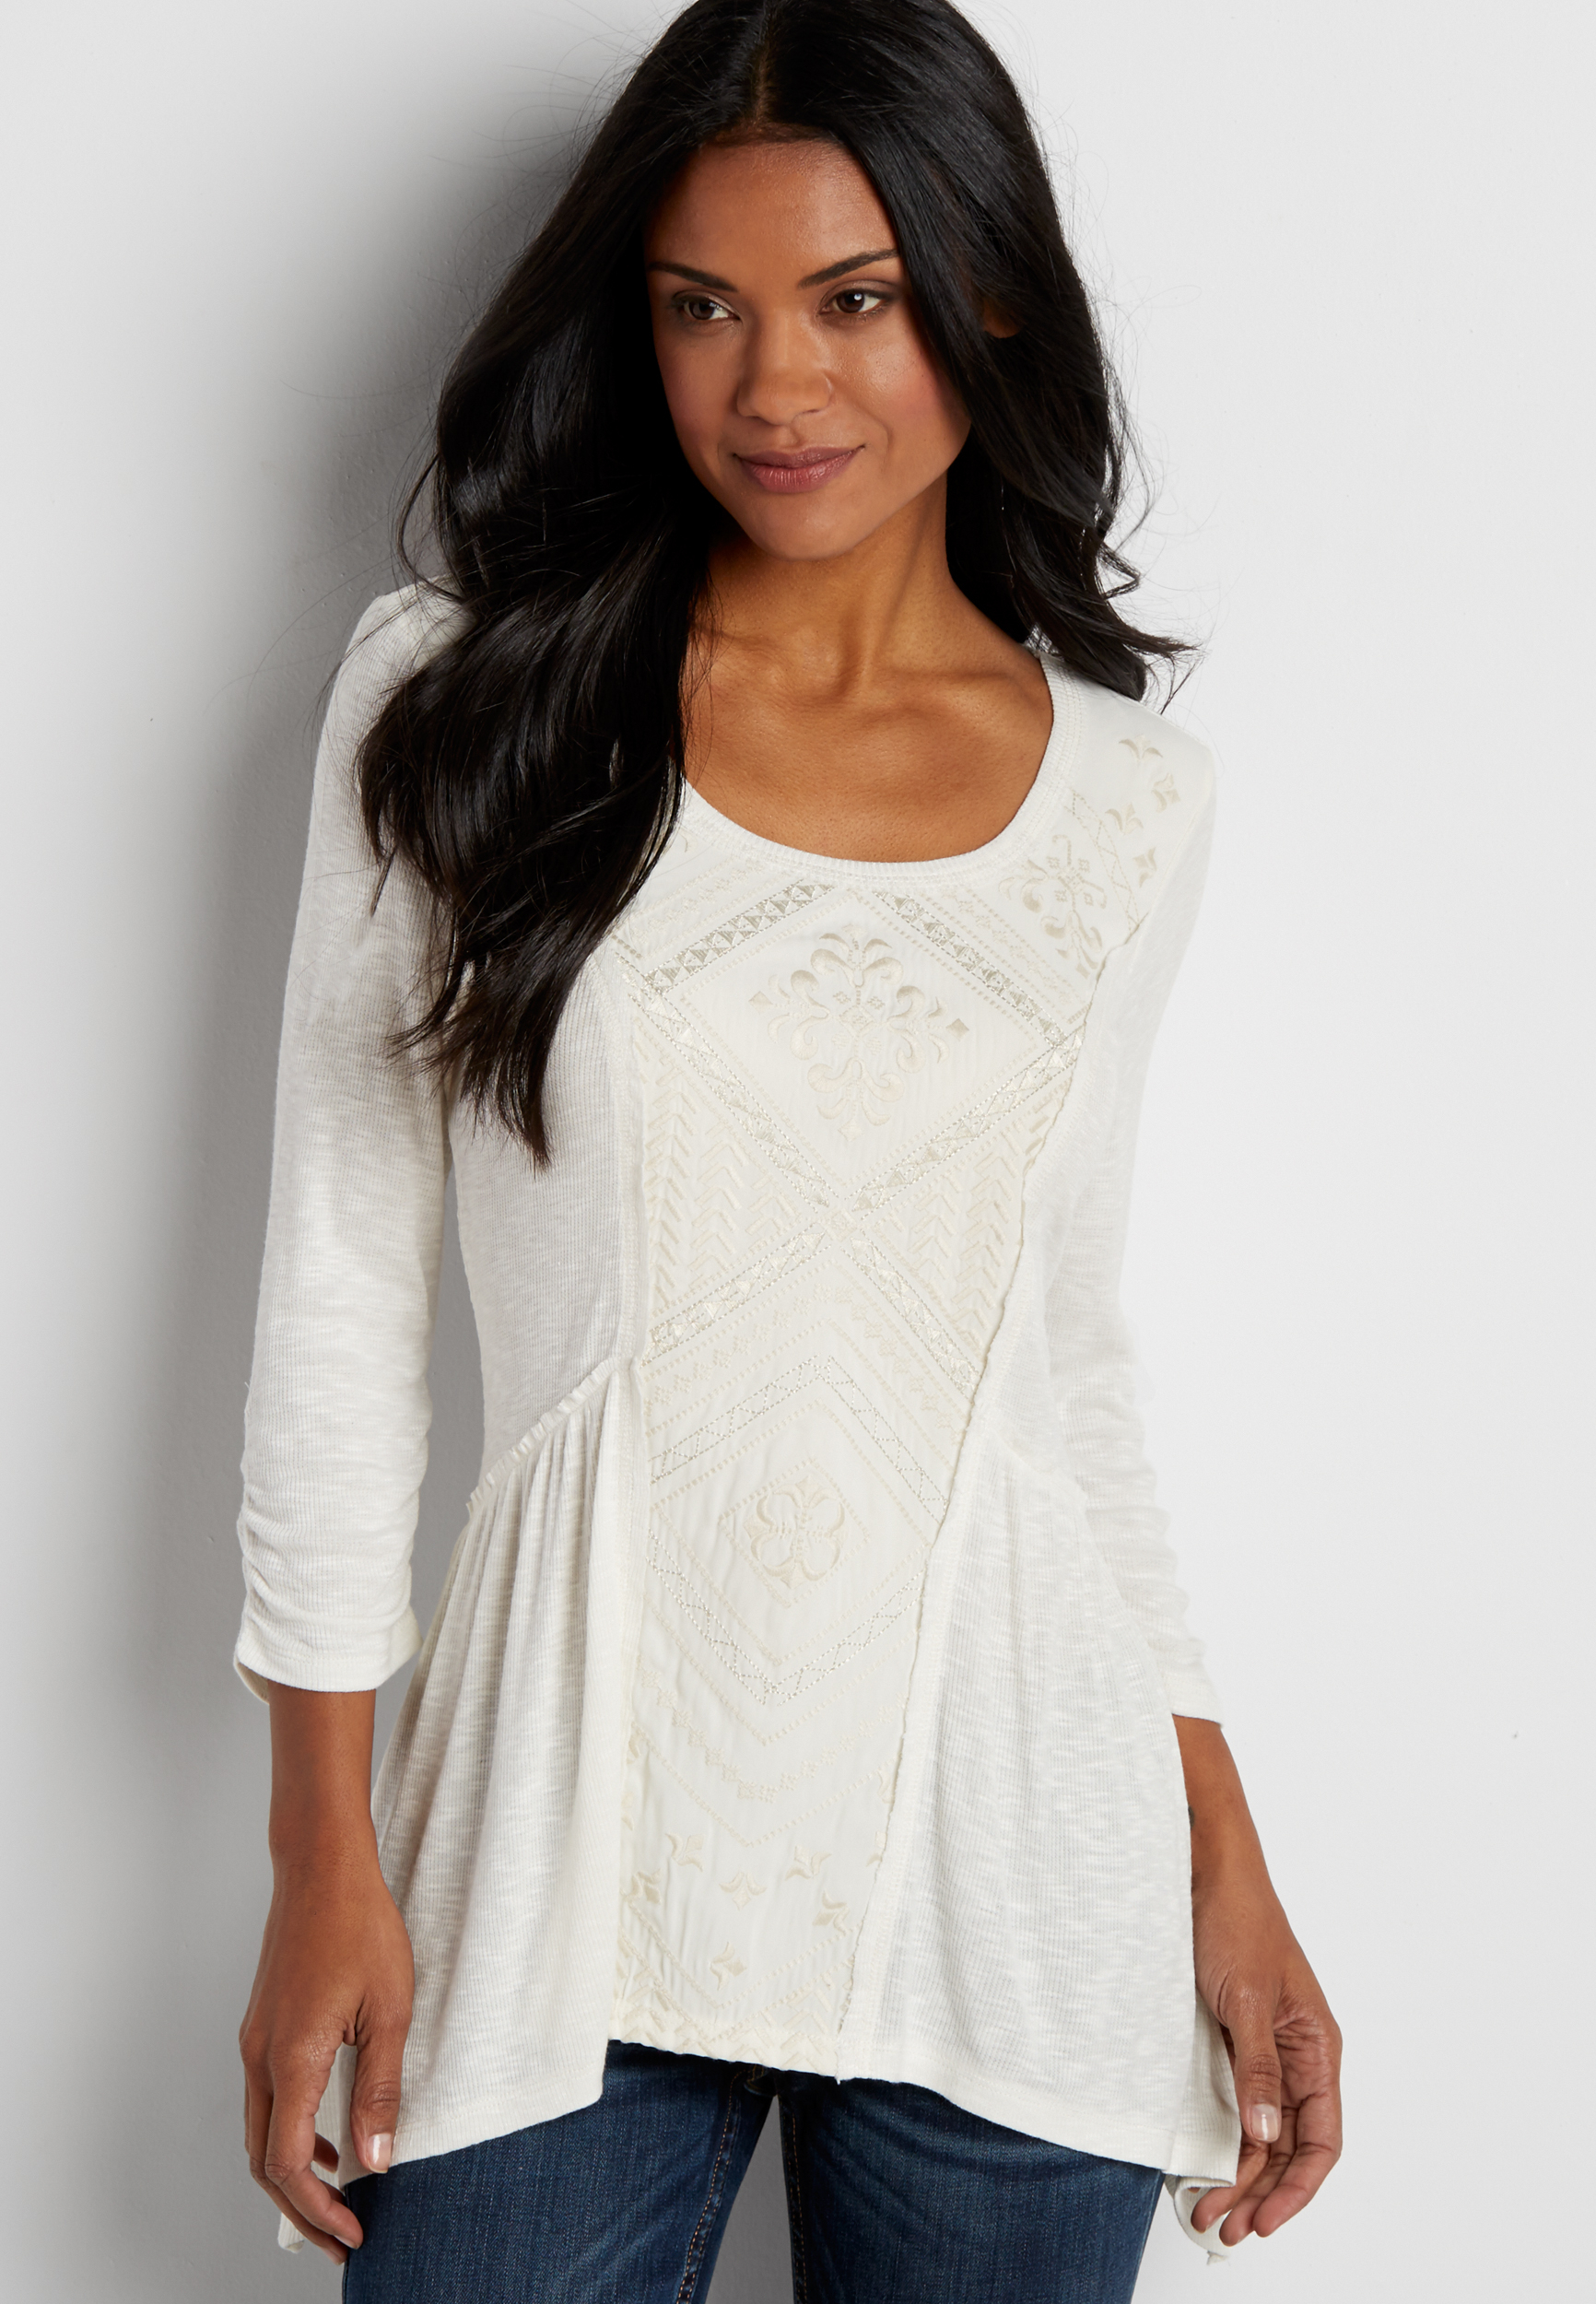 ribbed top with embroidered center panel | maurices